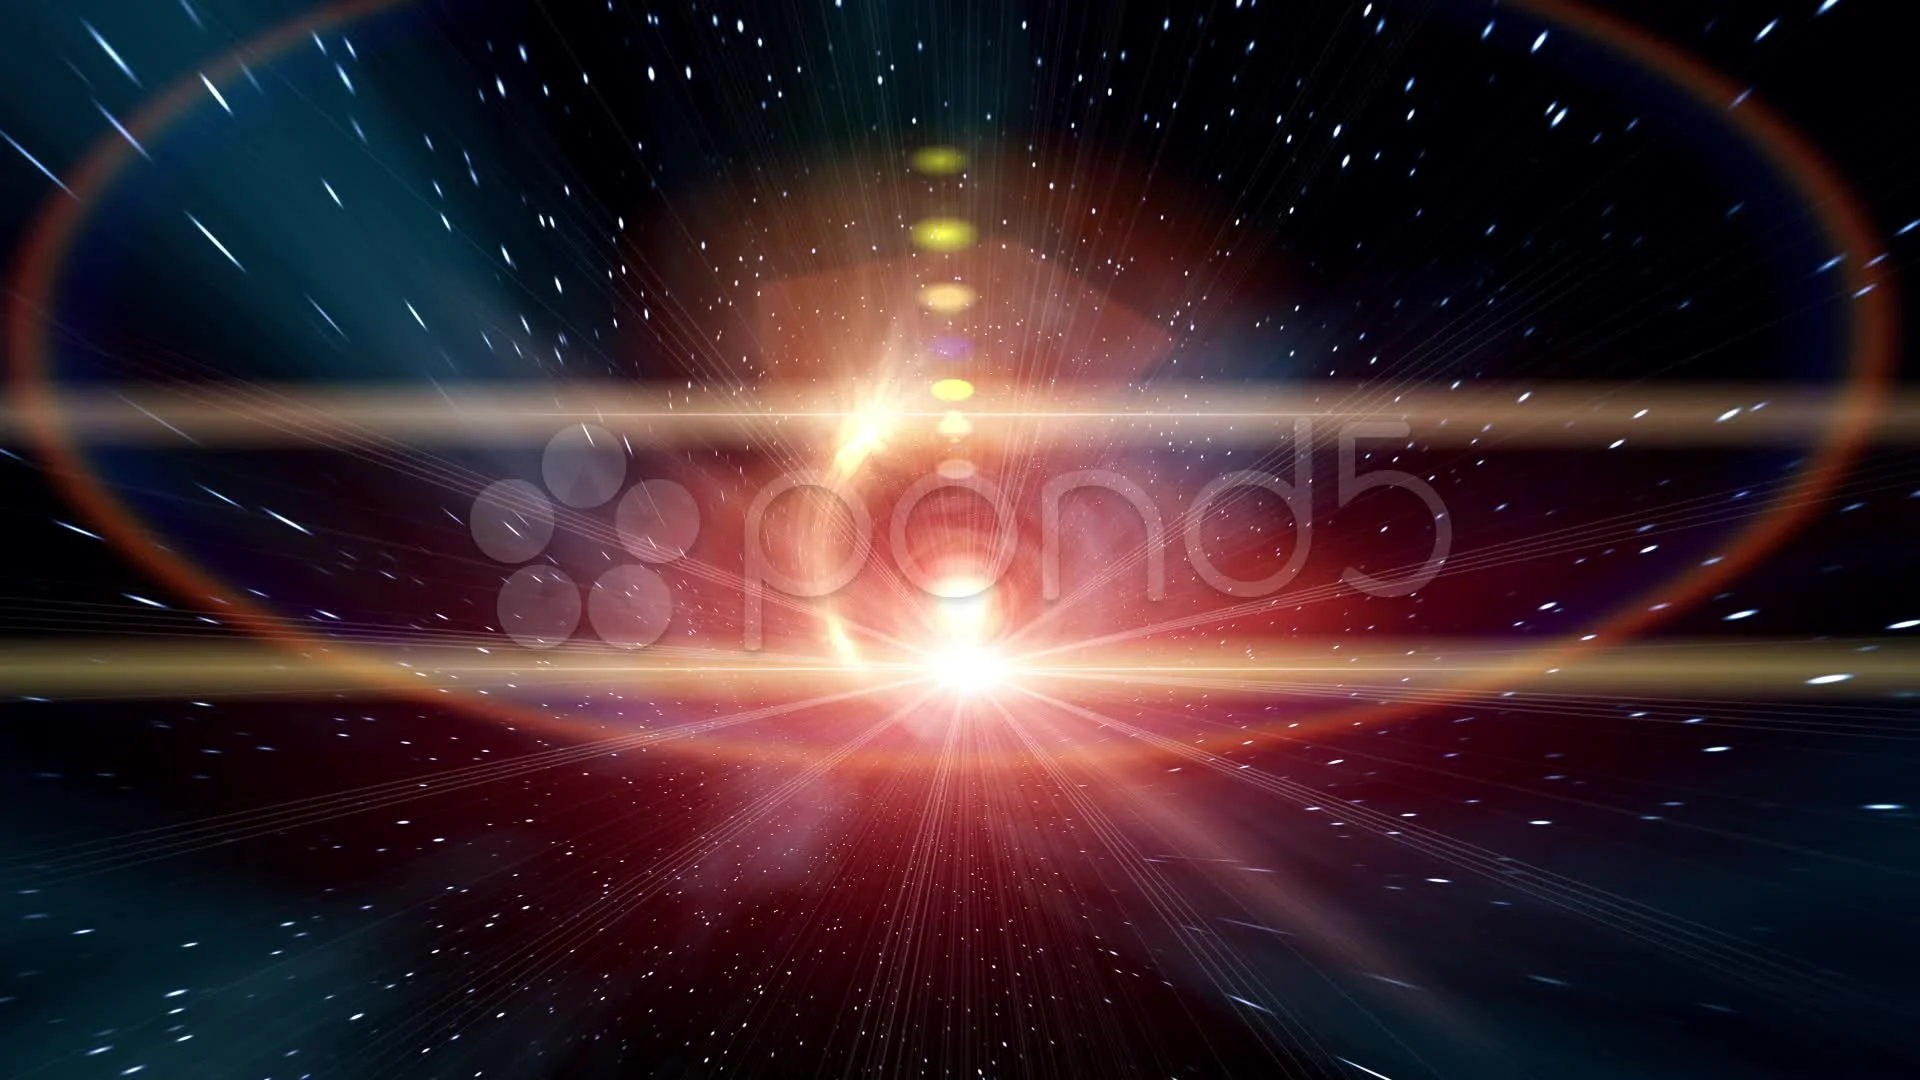 animated space background 05 | Stock Video | Pond5